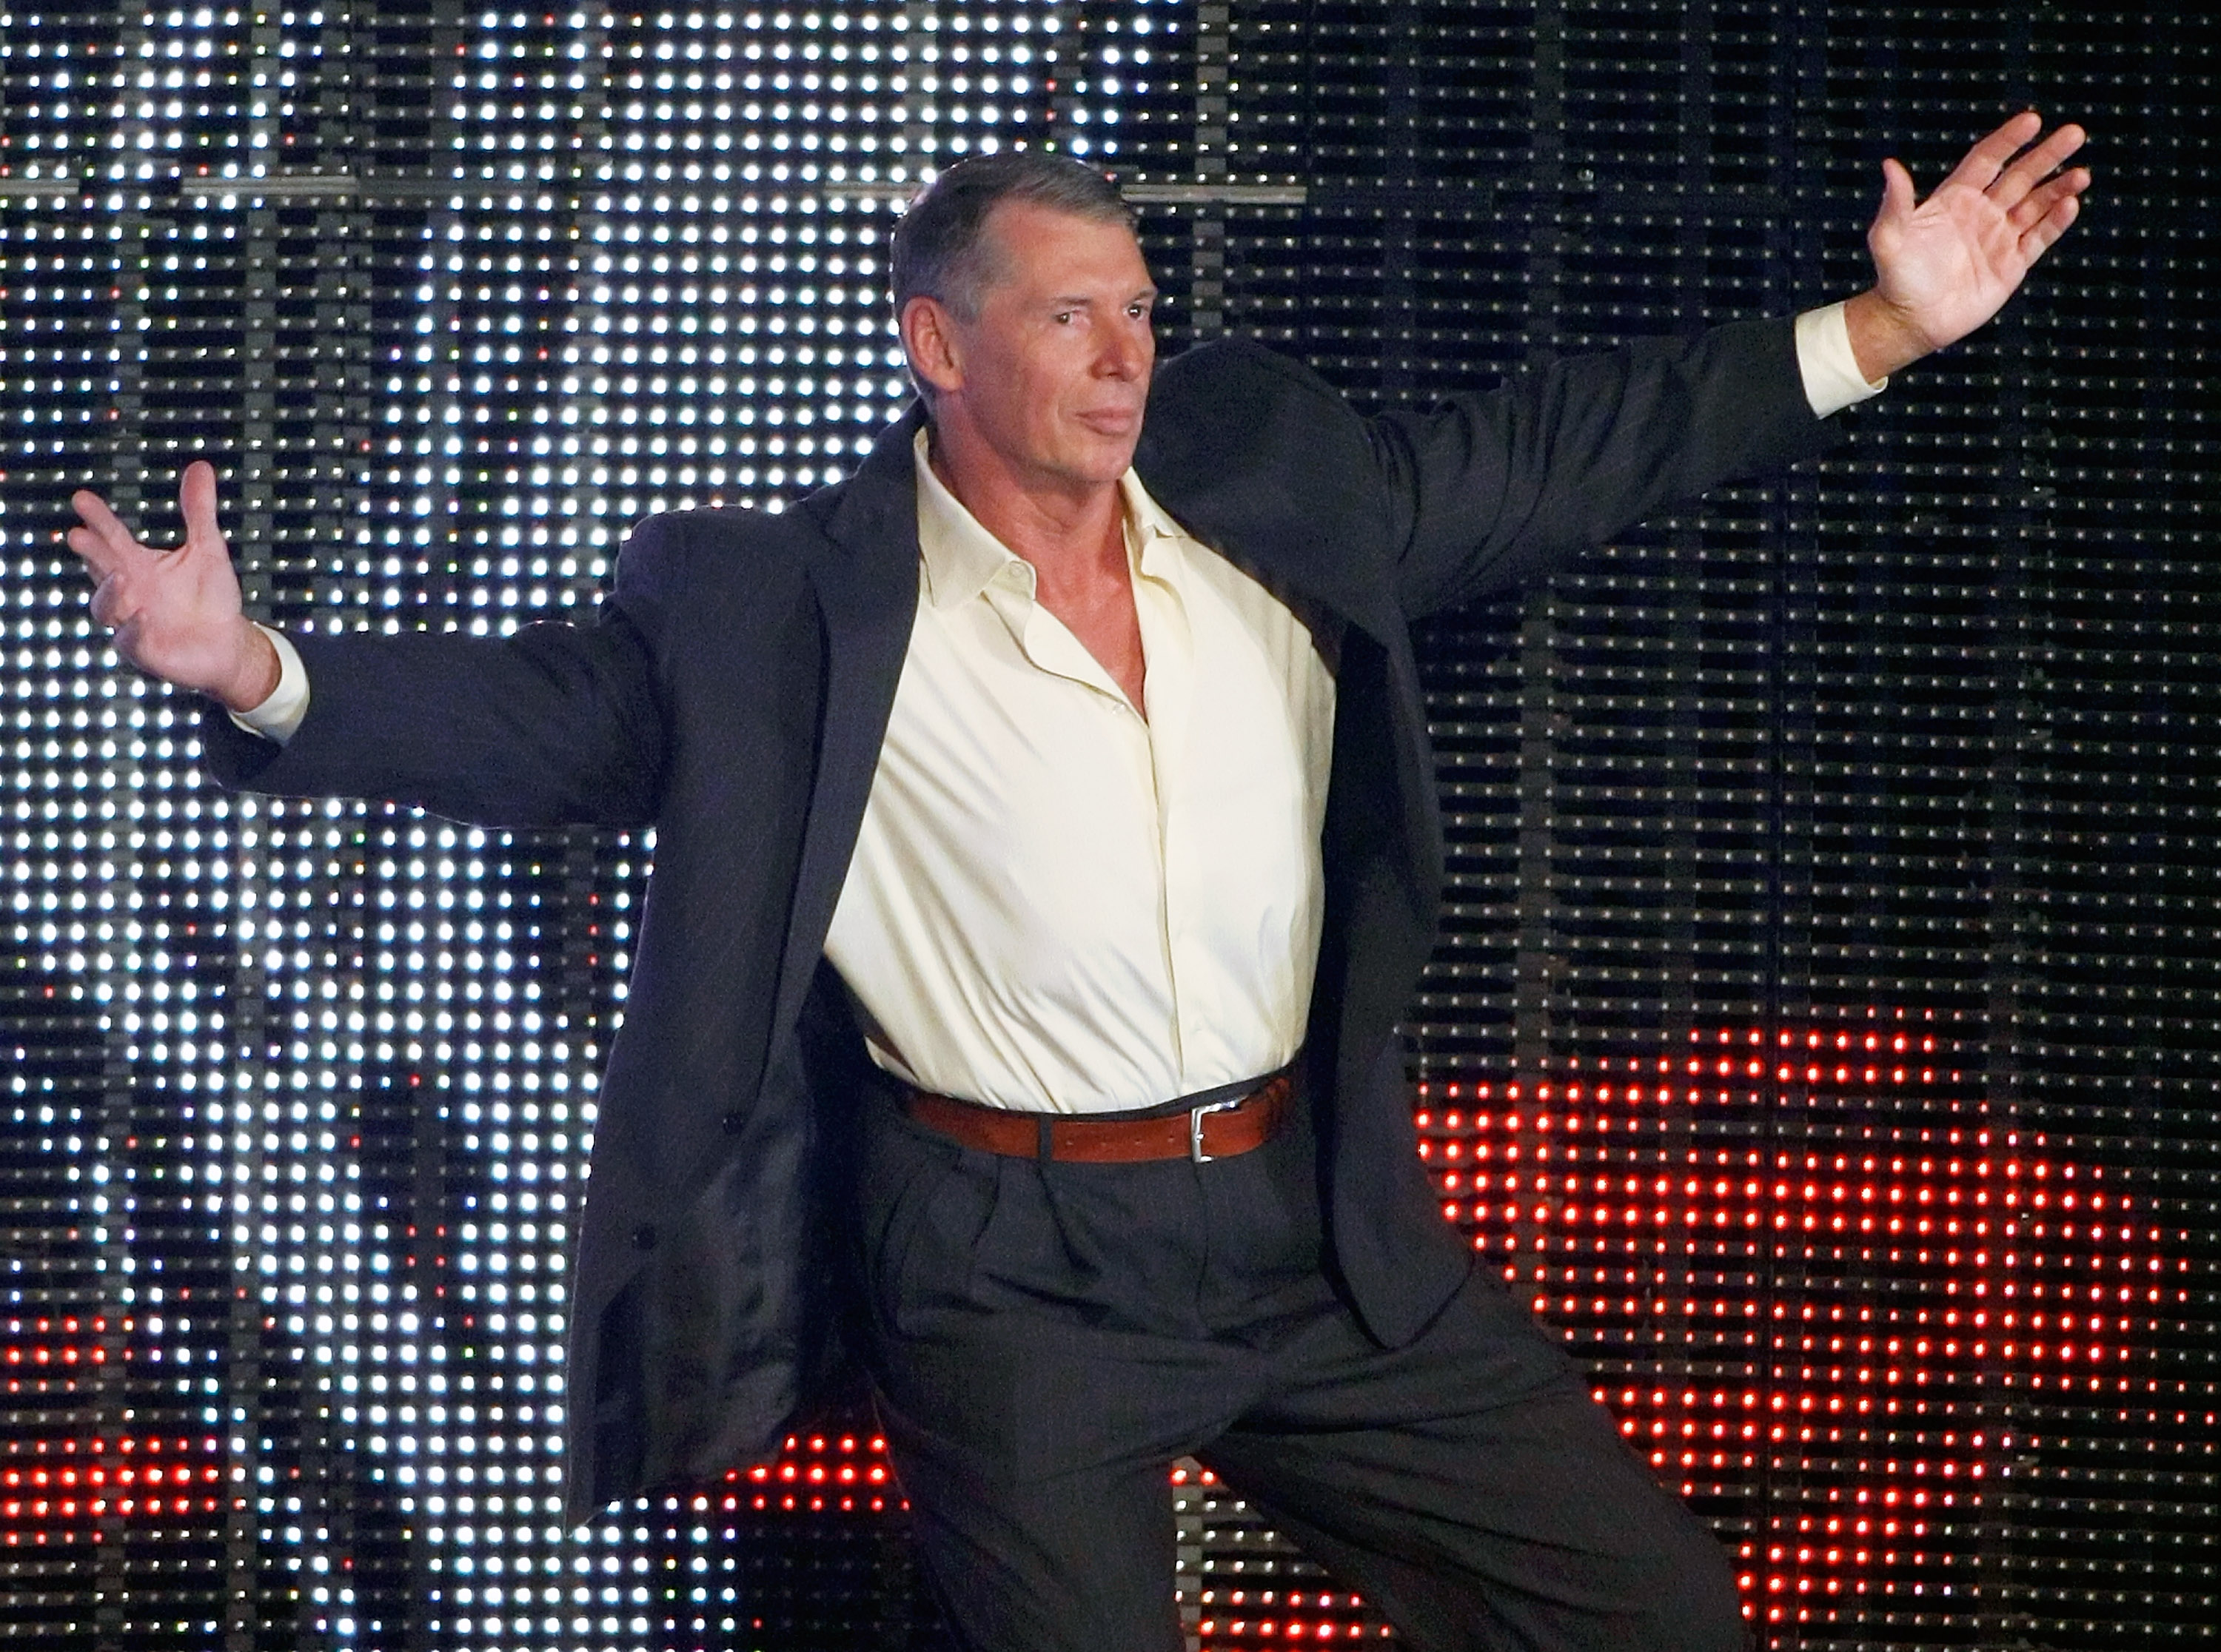 WWE Heiress Says There is No Direct Successor After Vince McMahon